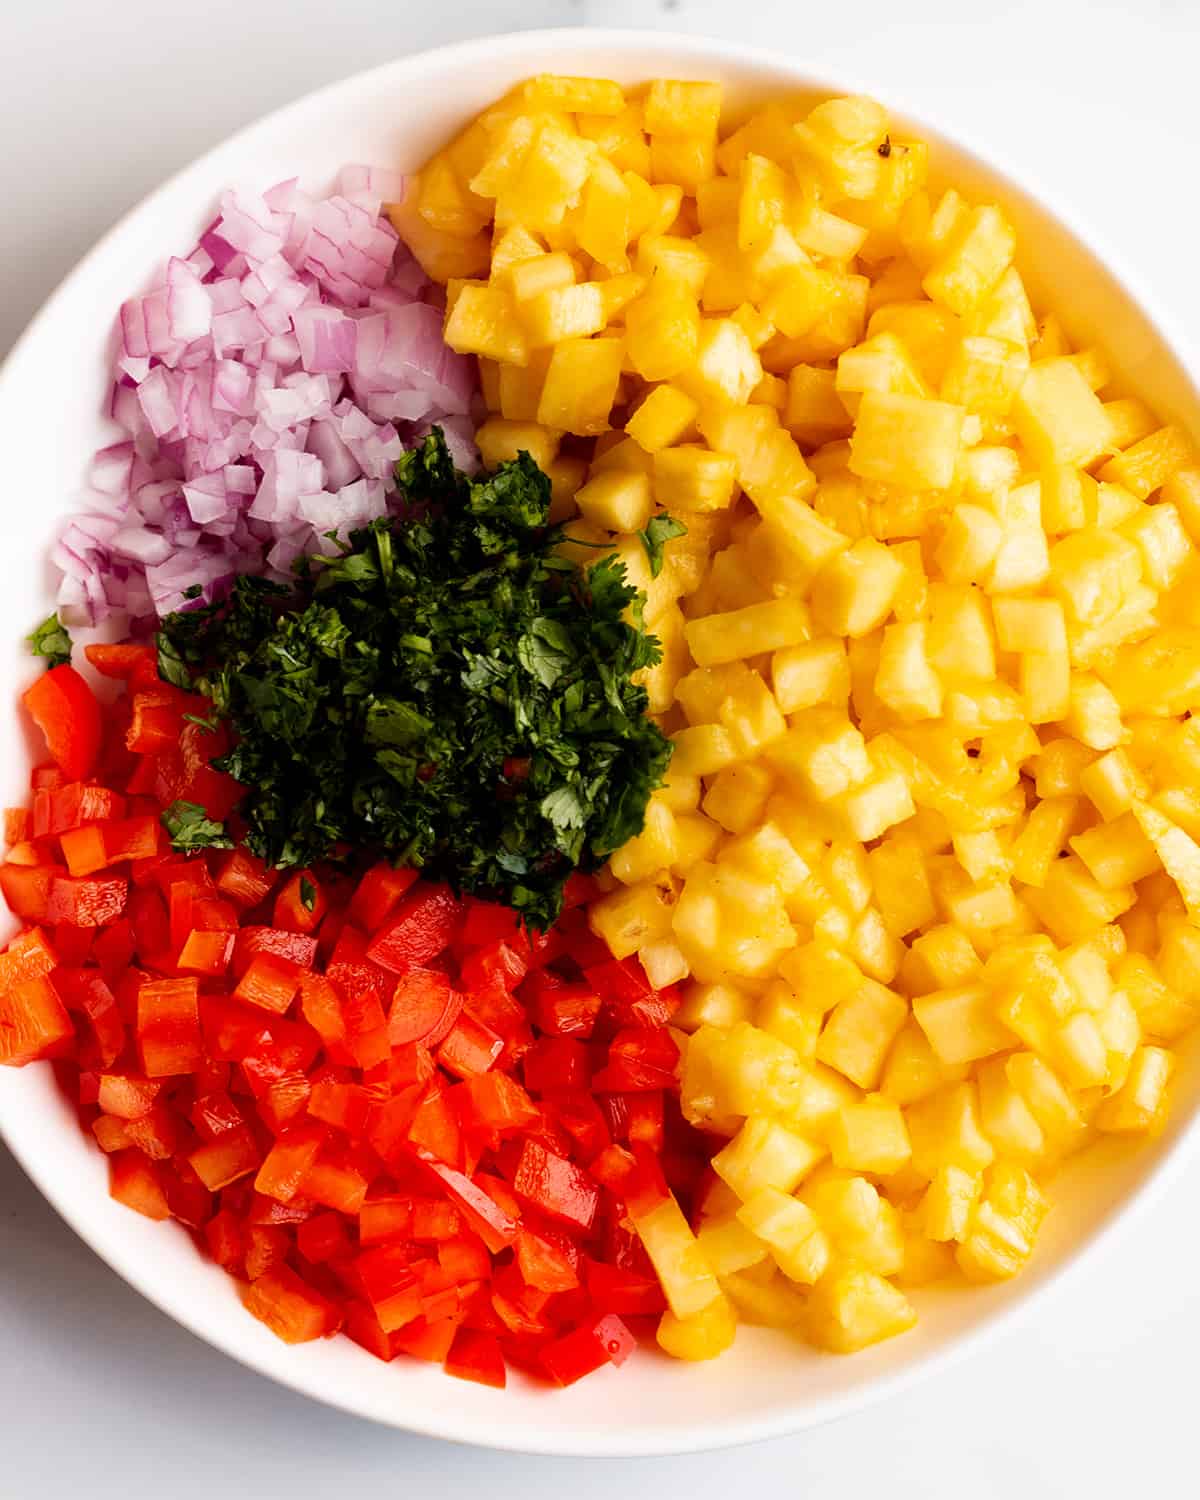 Bowl of diced pineapple, red onion, cilantro, and red peppers.